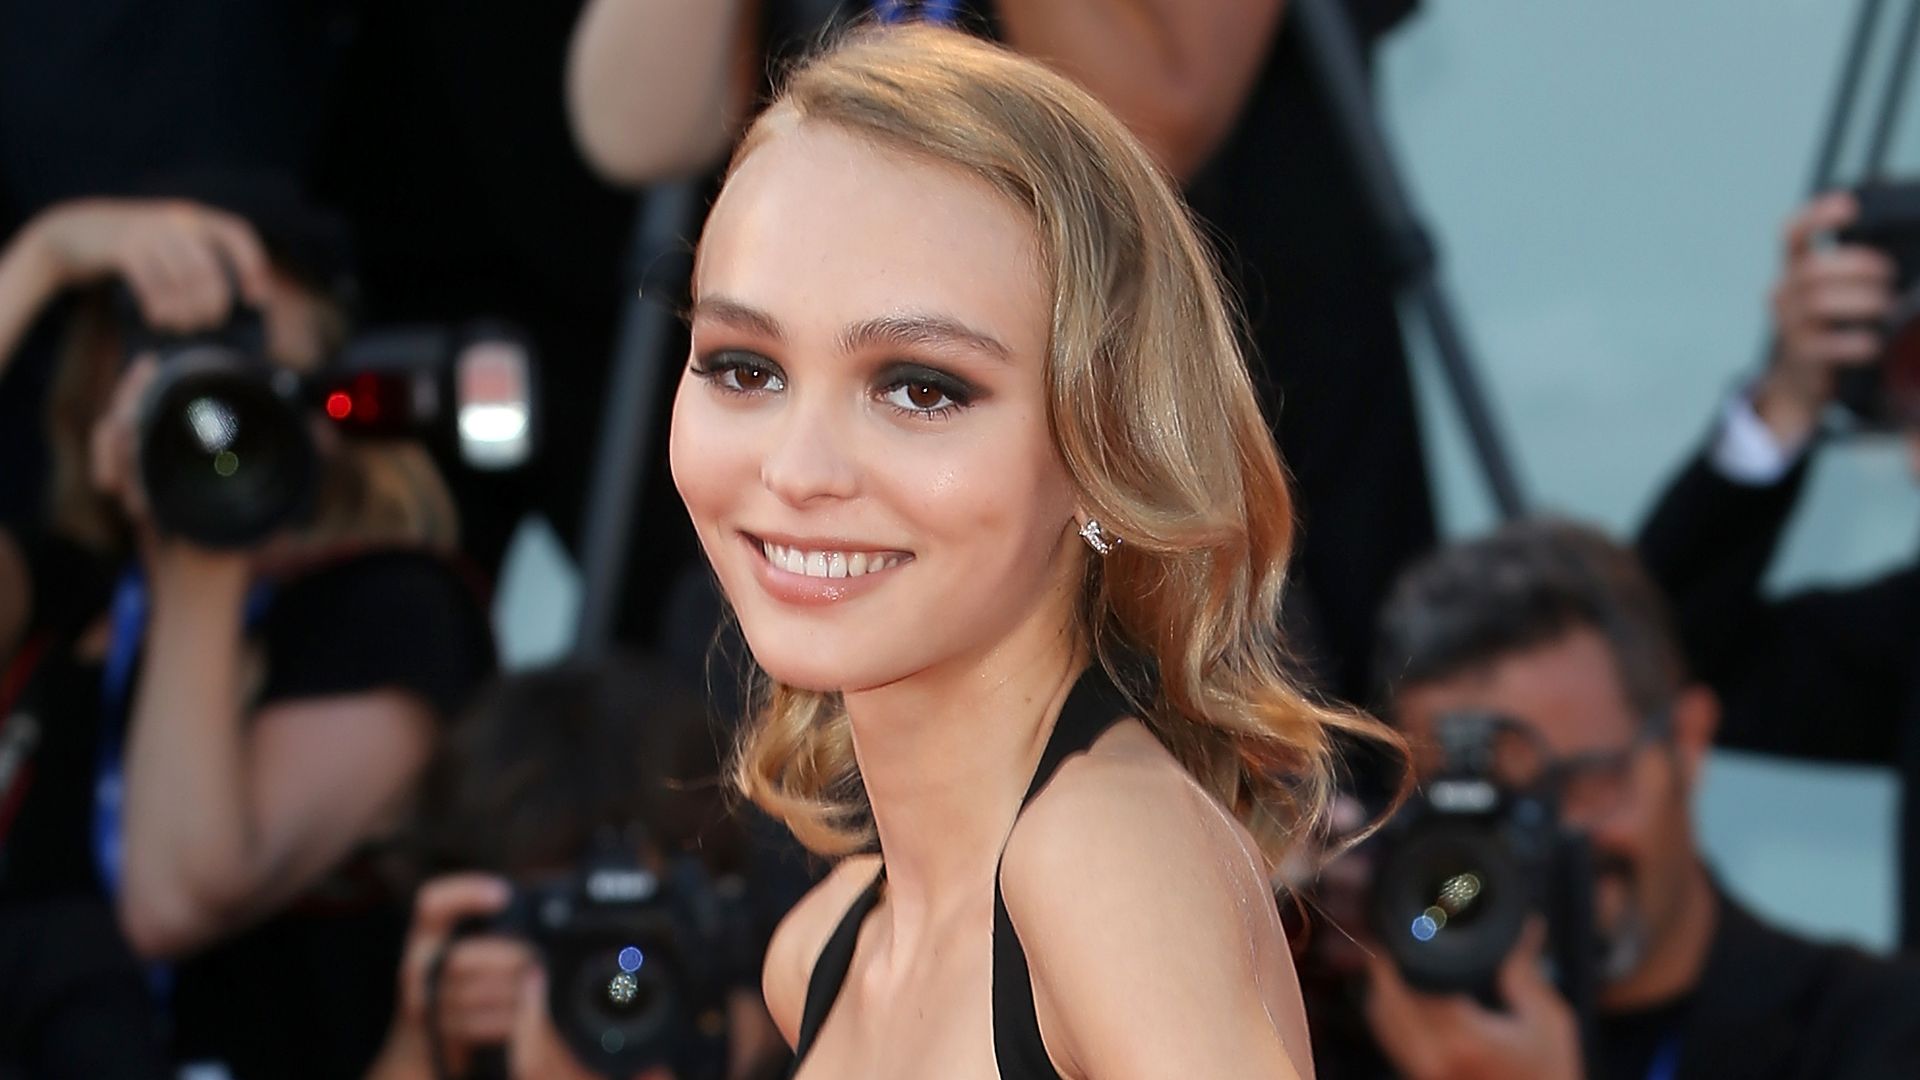 Lily-Rose Depp rocks seriously unexpected lingerie in photoshoot with girlfriend 070 Shake